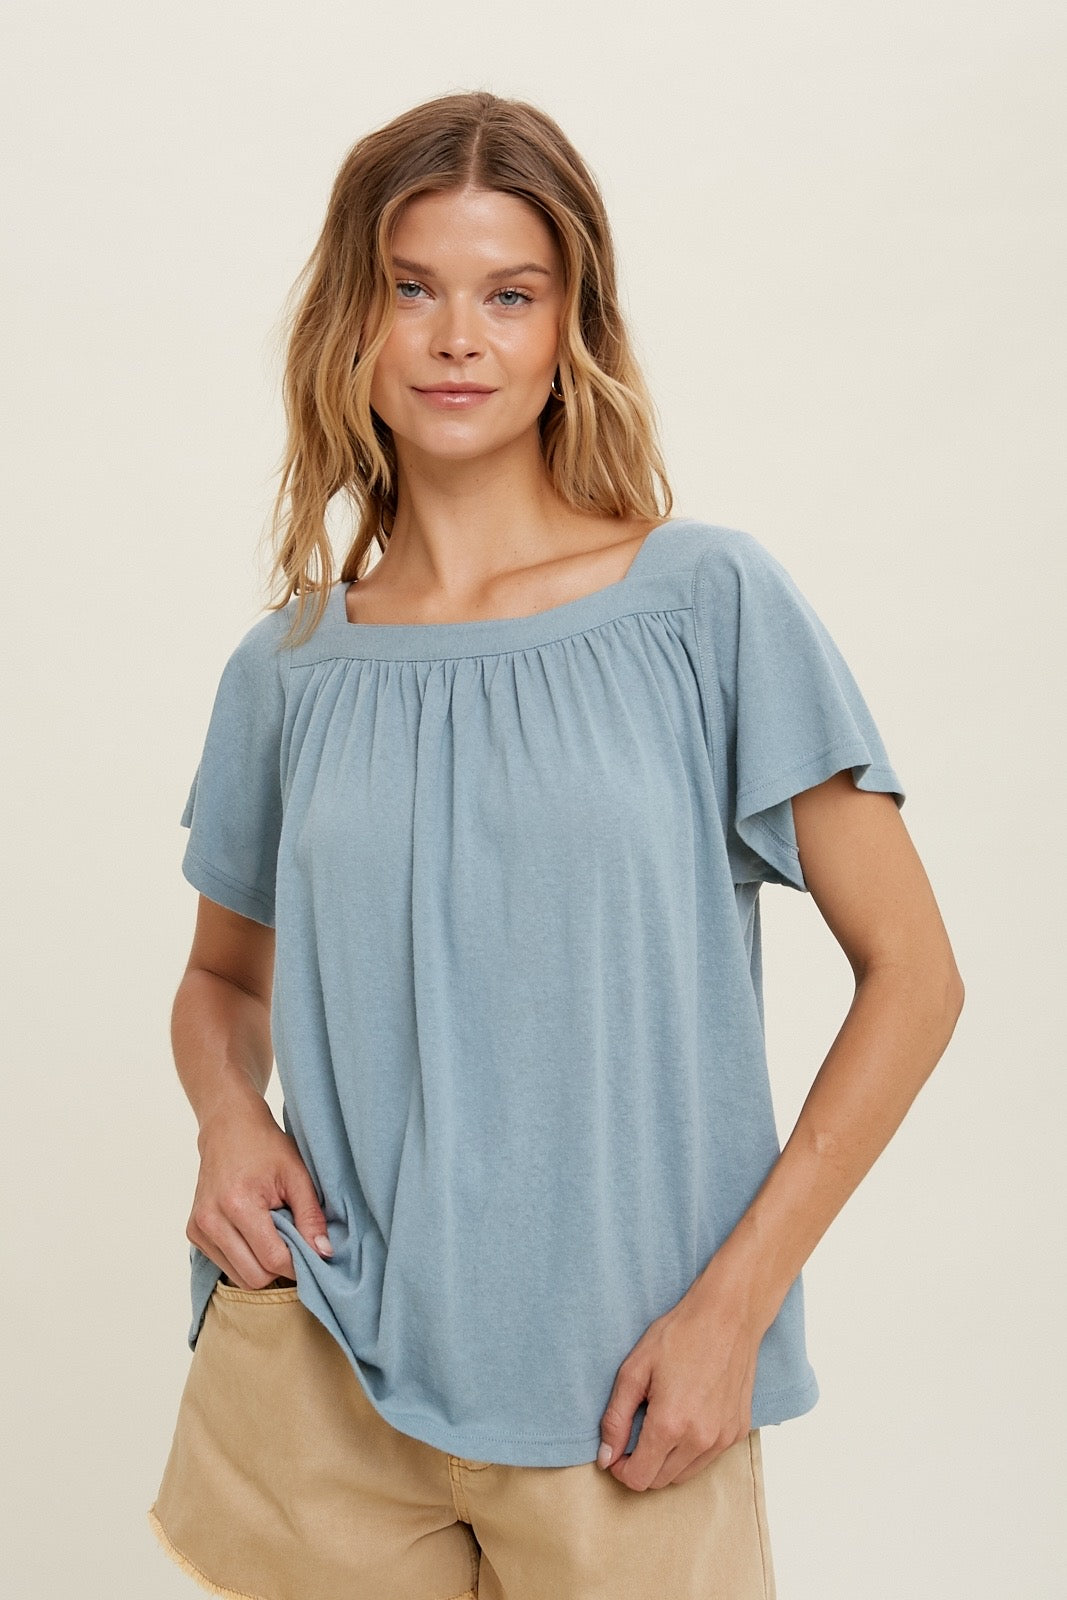 Wishlist® Square neck knit top with tie back